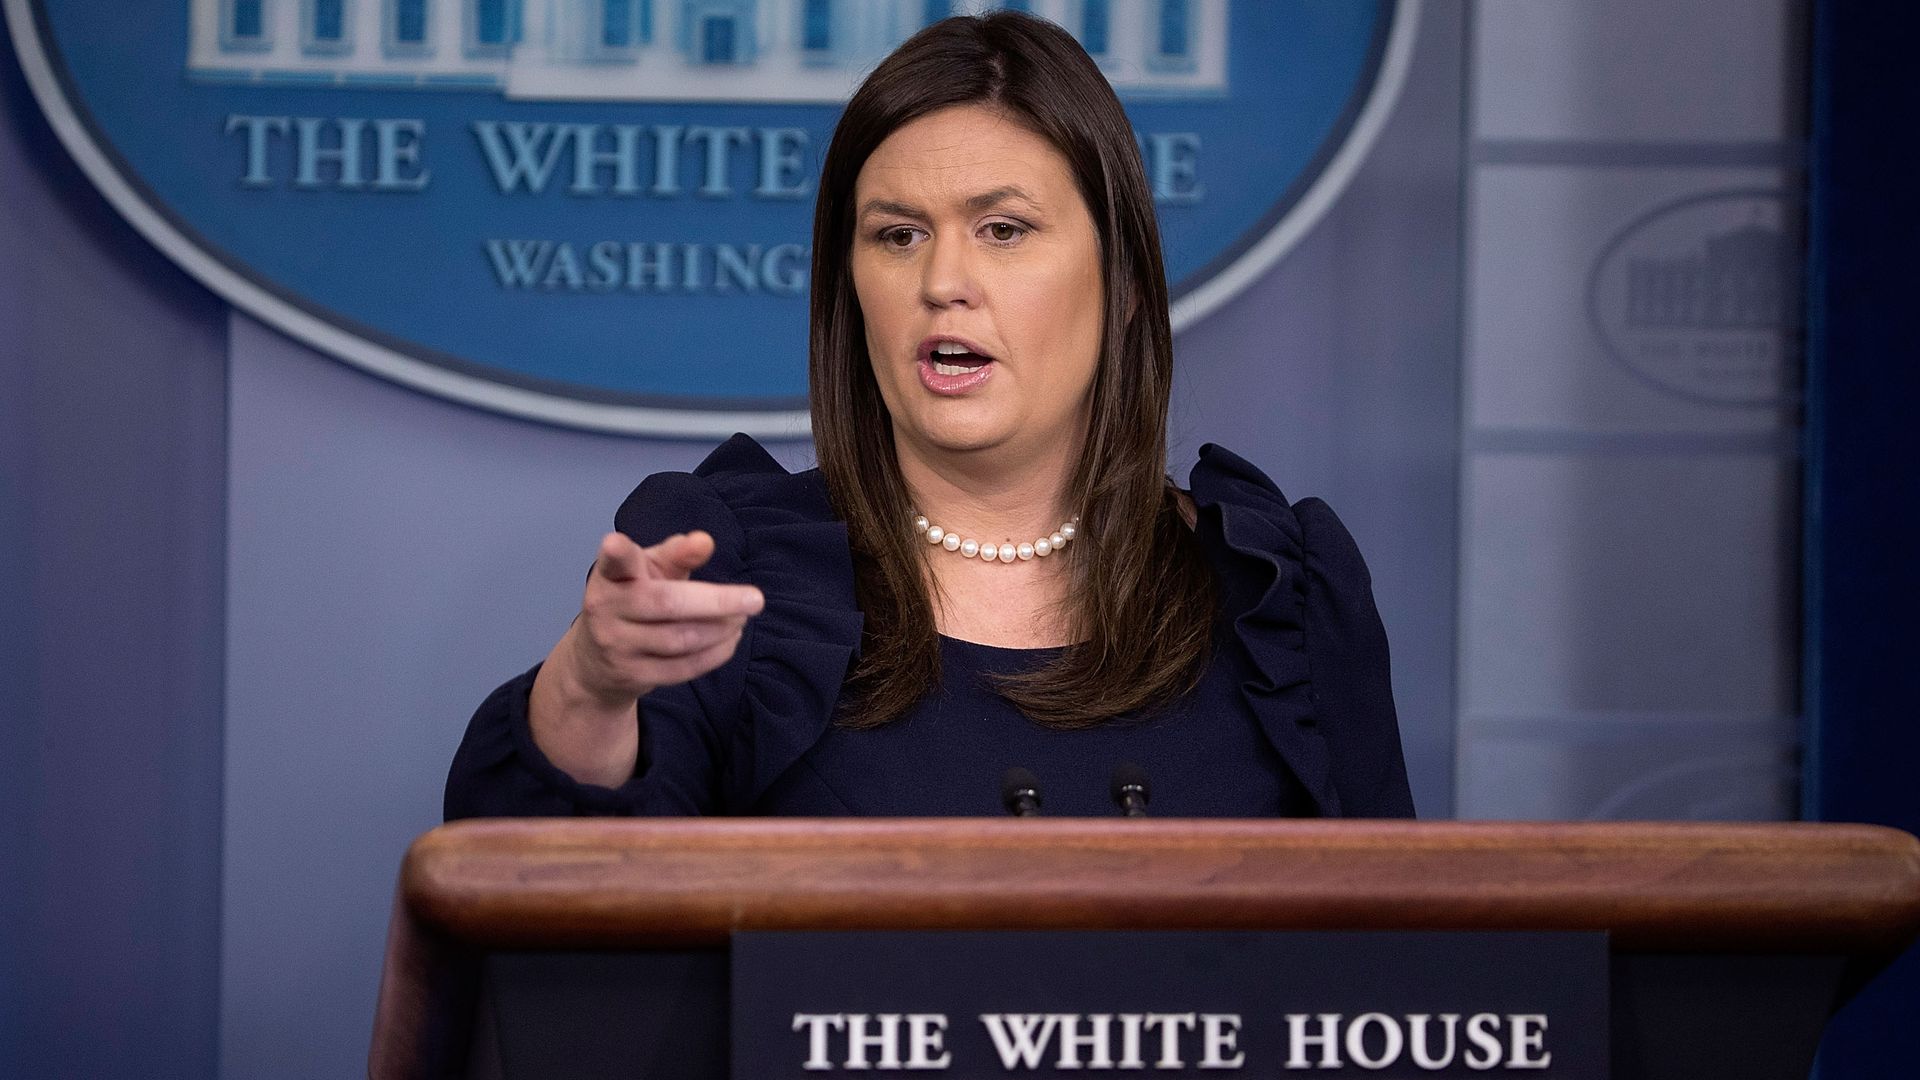 Sarah Sanders points to a reporter while speaking at the podium